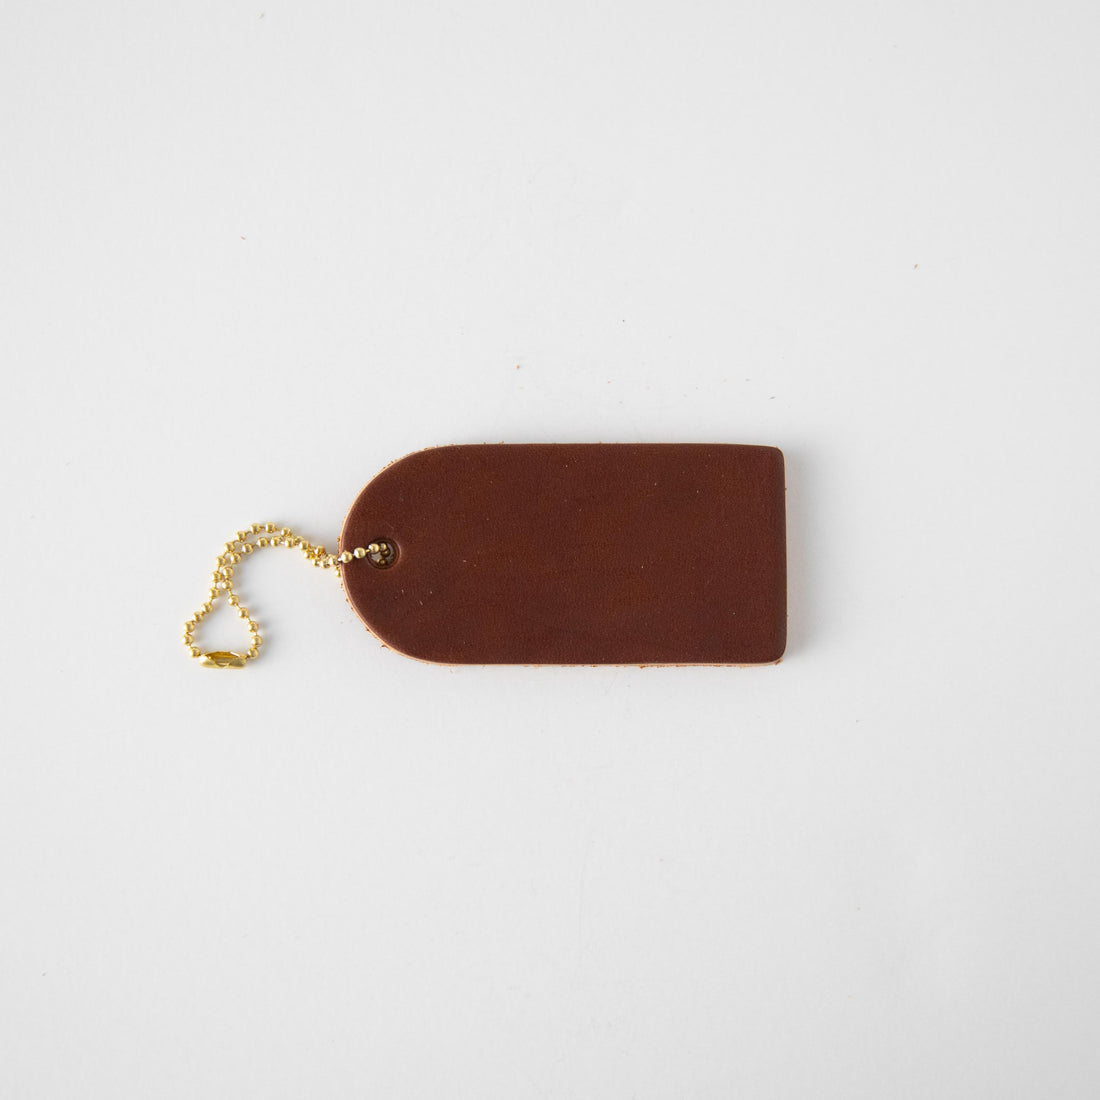 Black Hotel Key Fob | Leather Keychain Made in America at KMM & Co. Yes